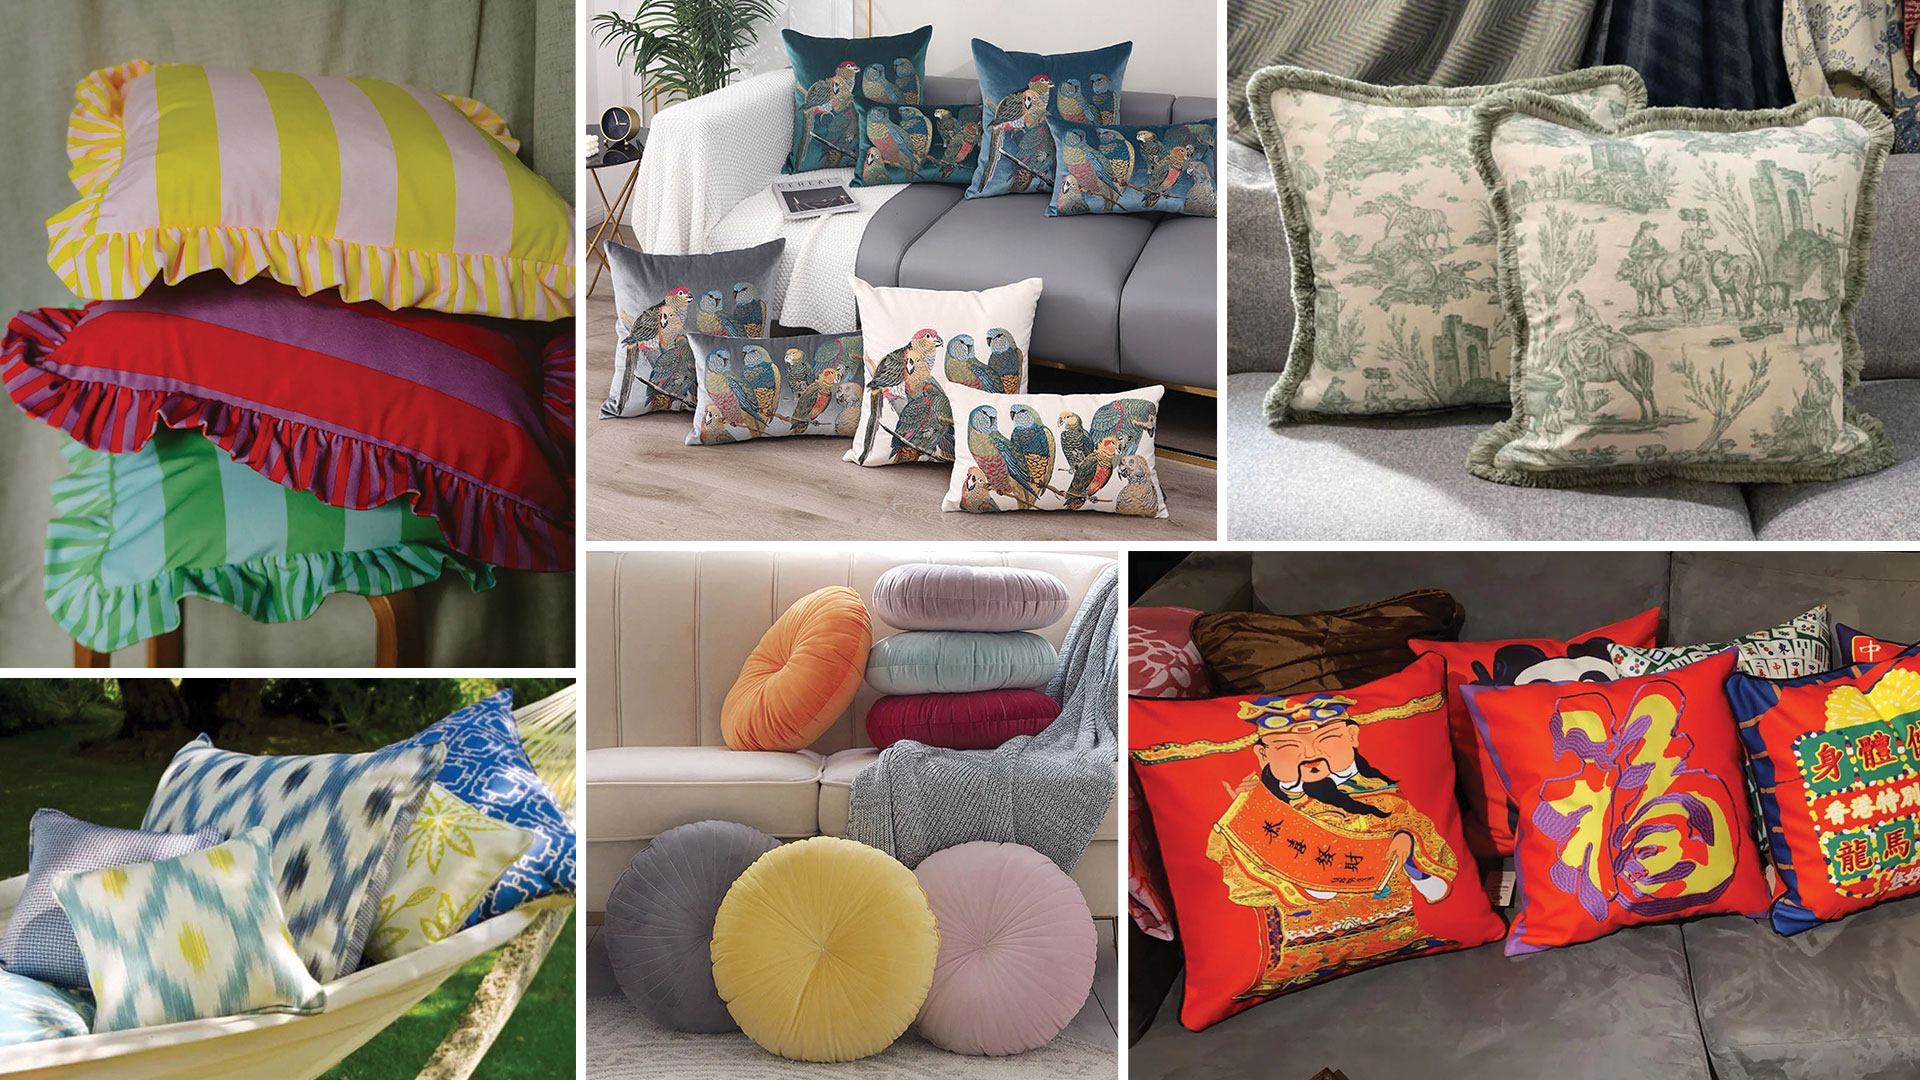 Pillow Talk: Throw down a cluster of covetable cushions to change up your interiors